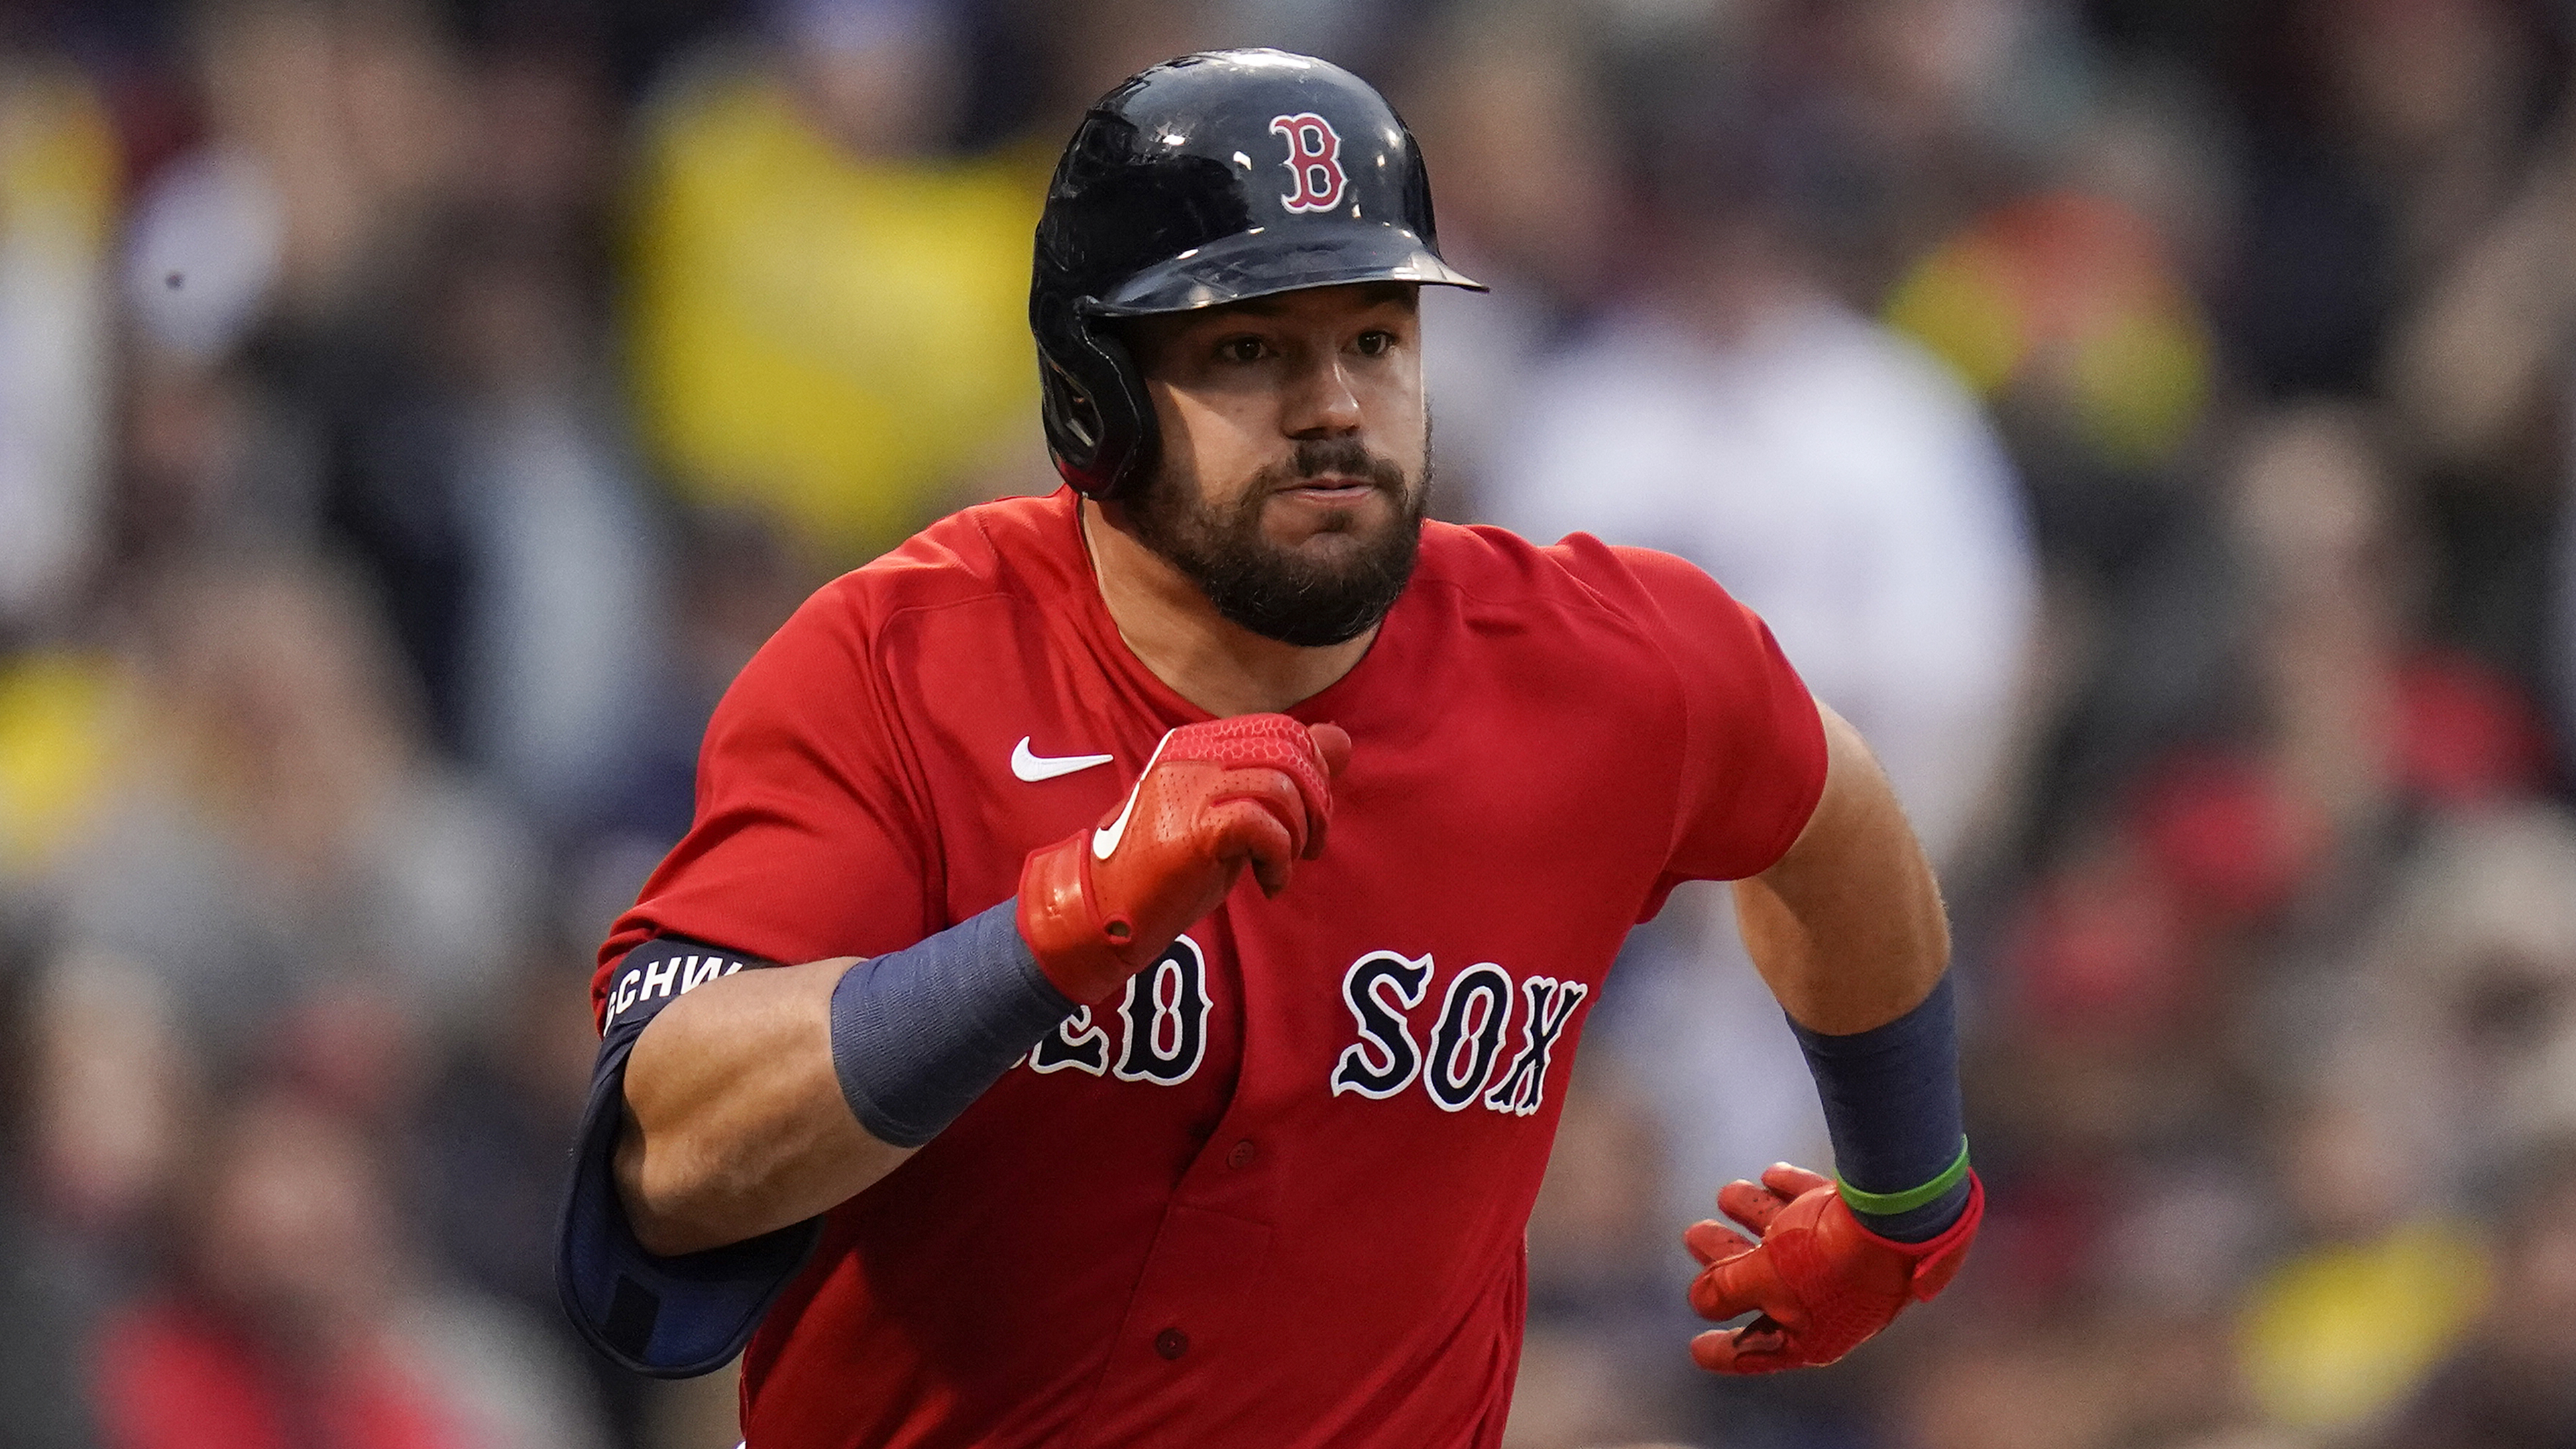 BR: Boston Red Sox 